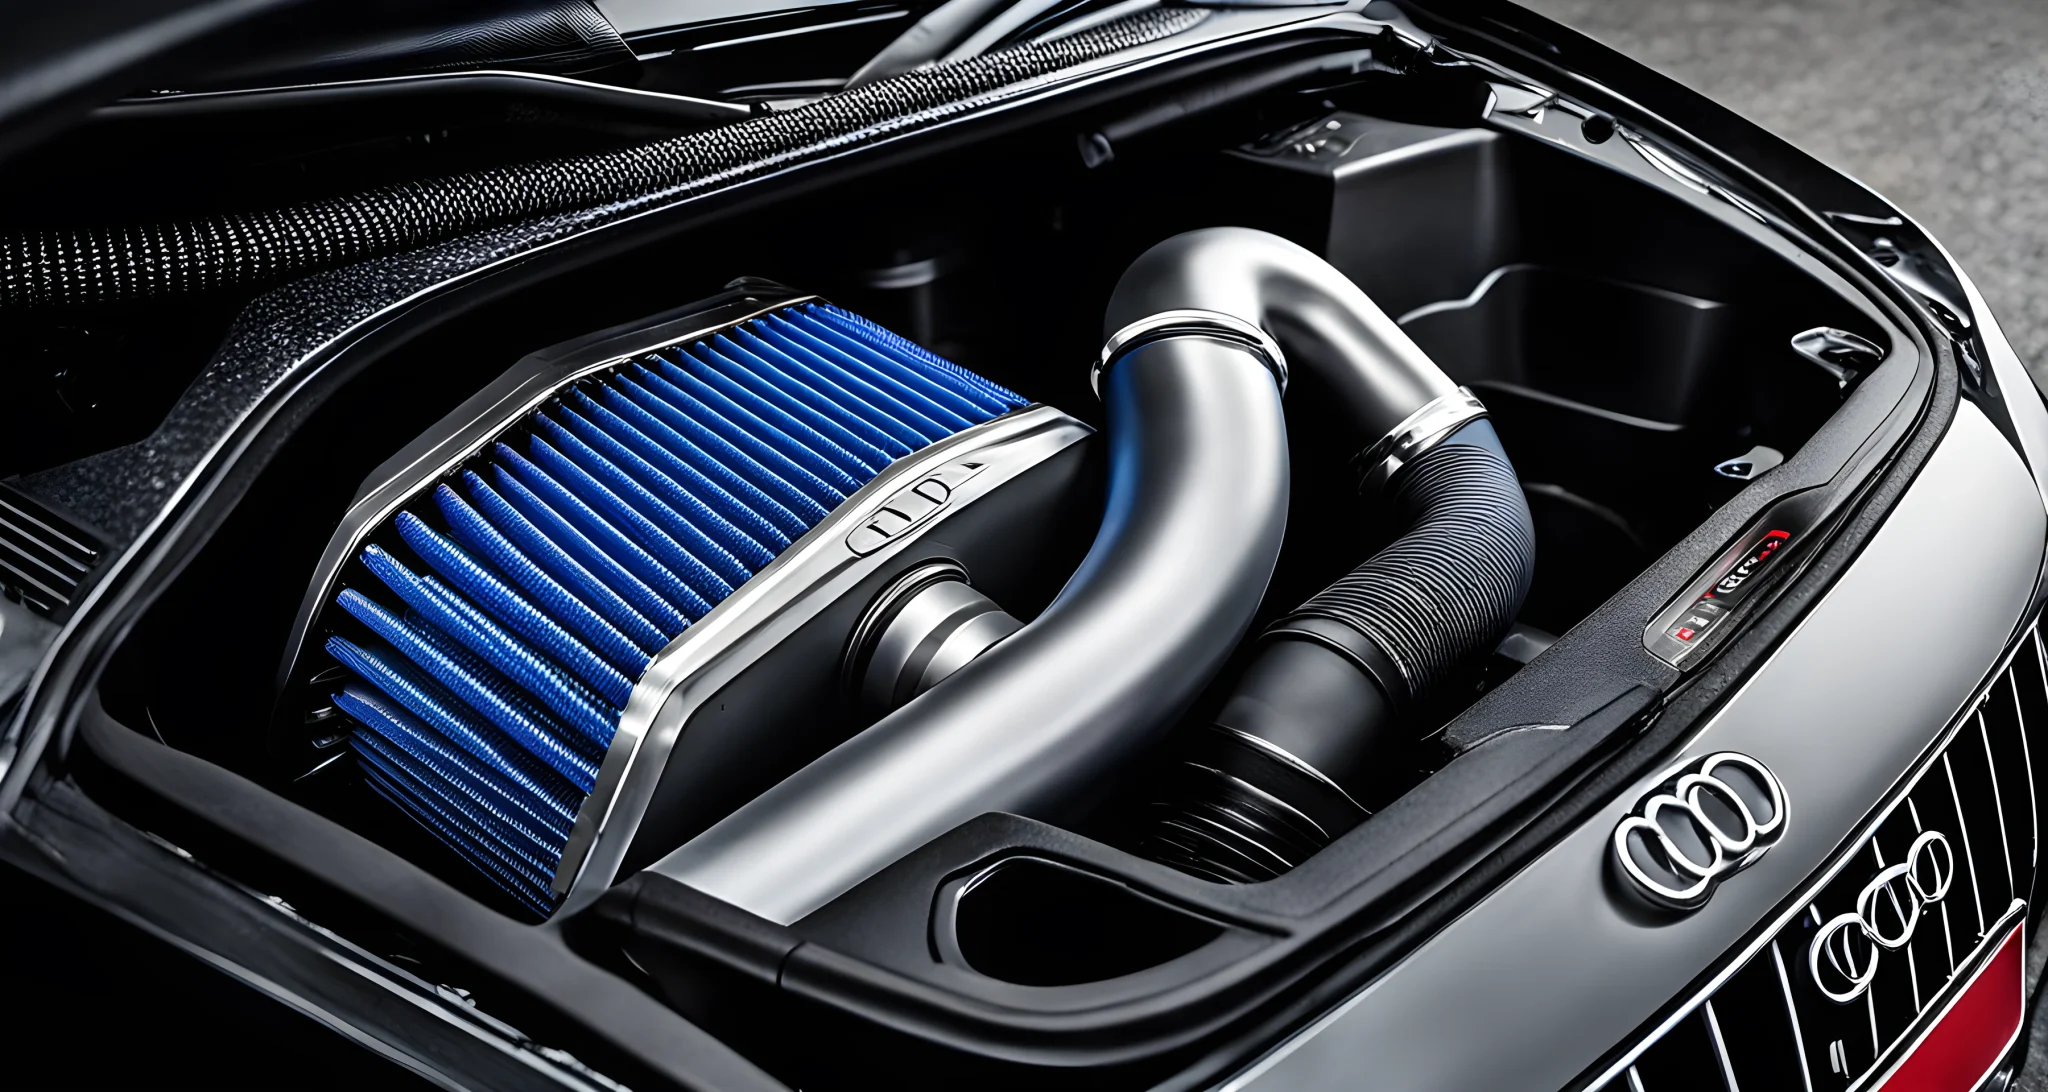 The image shows a cold air intake system installed in an Audi car.